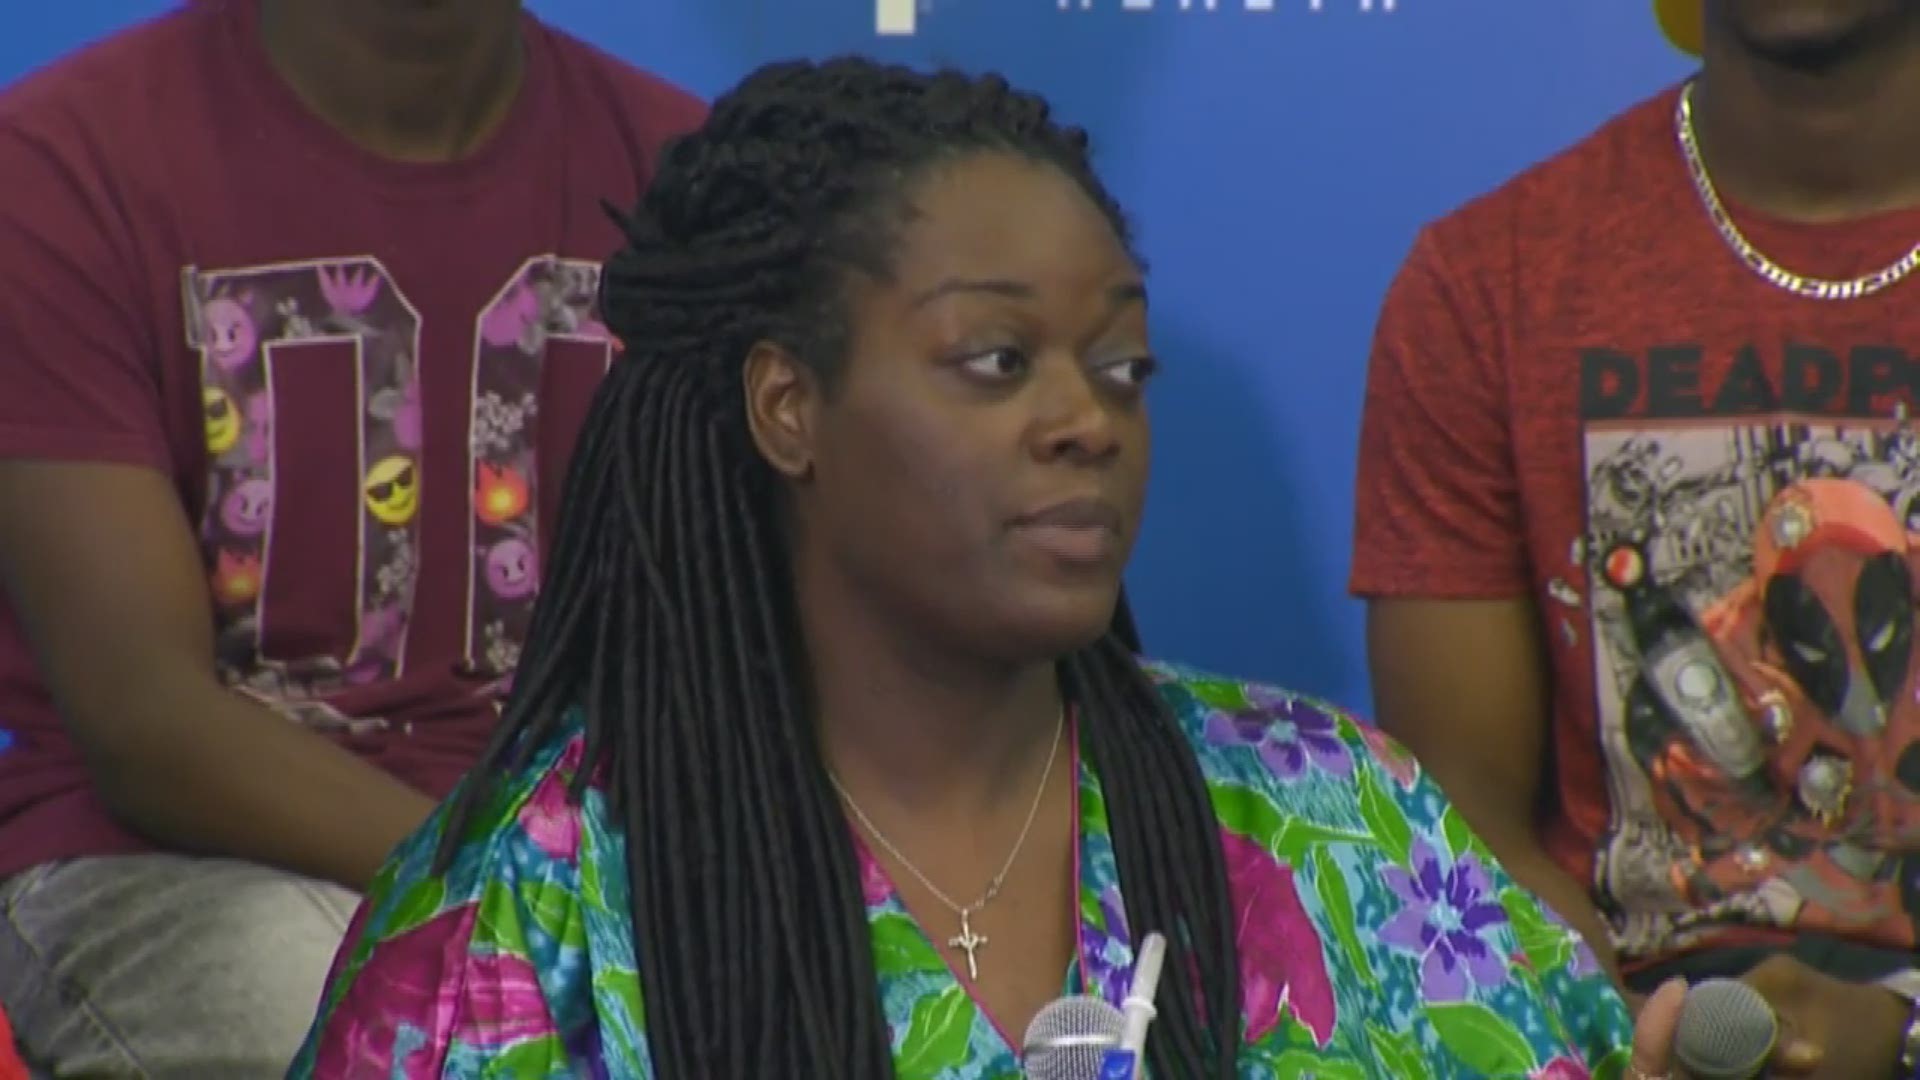 Shooting victim Shetamia Taylor shared her experience of the deadly downtown Dallas attack during a press conference Sunday at Baylor University Medical Center.